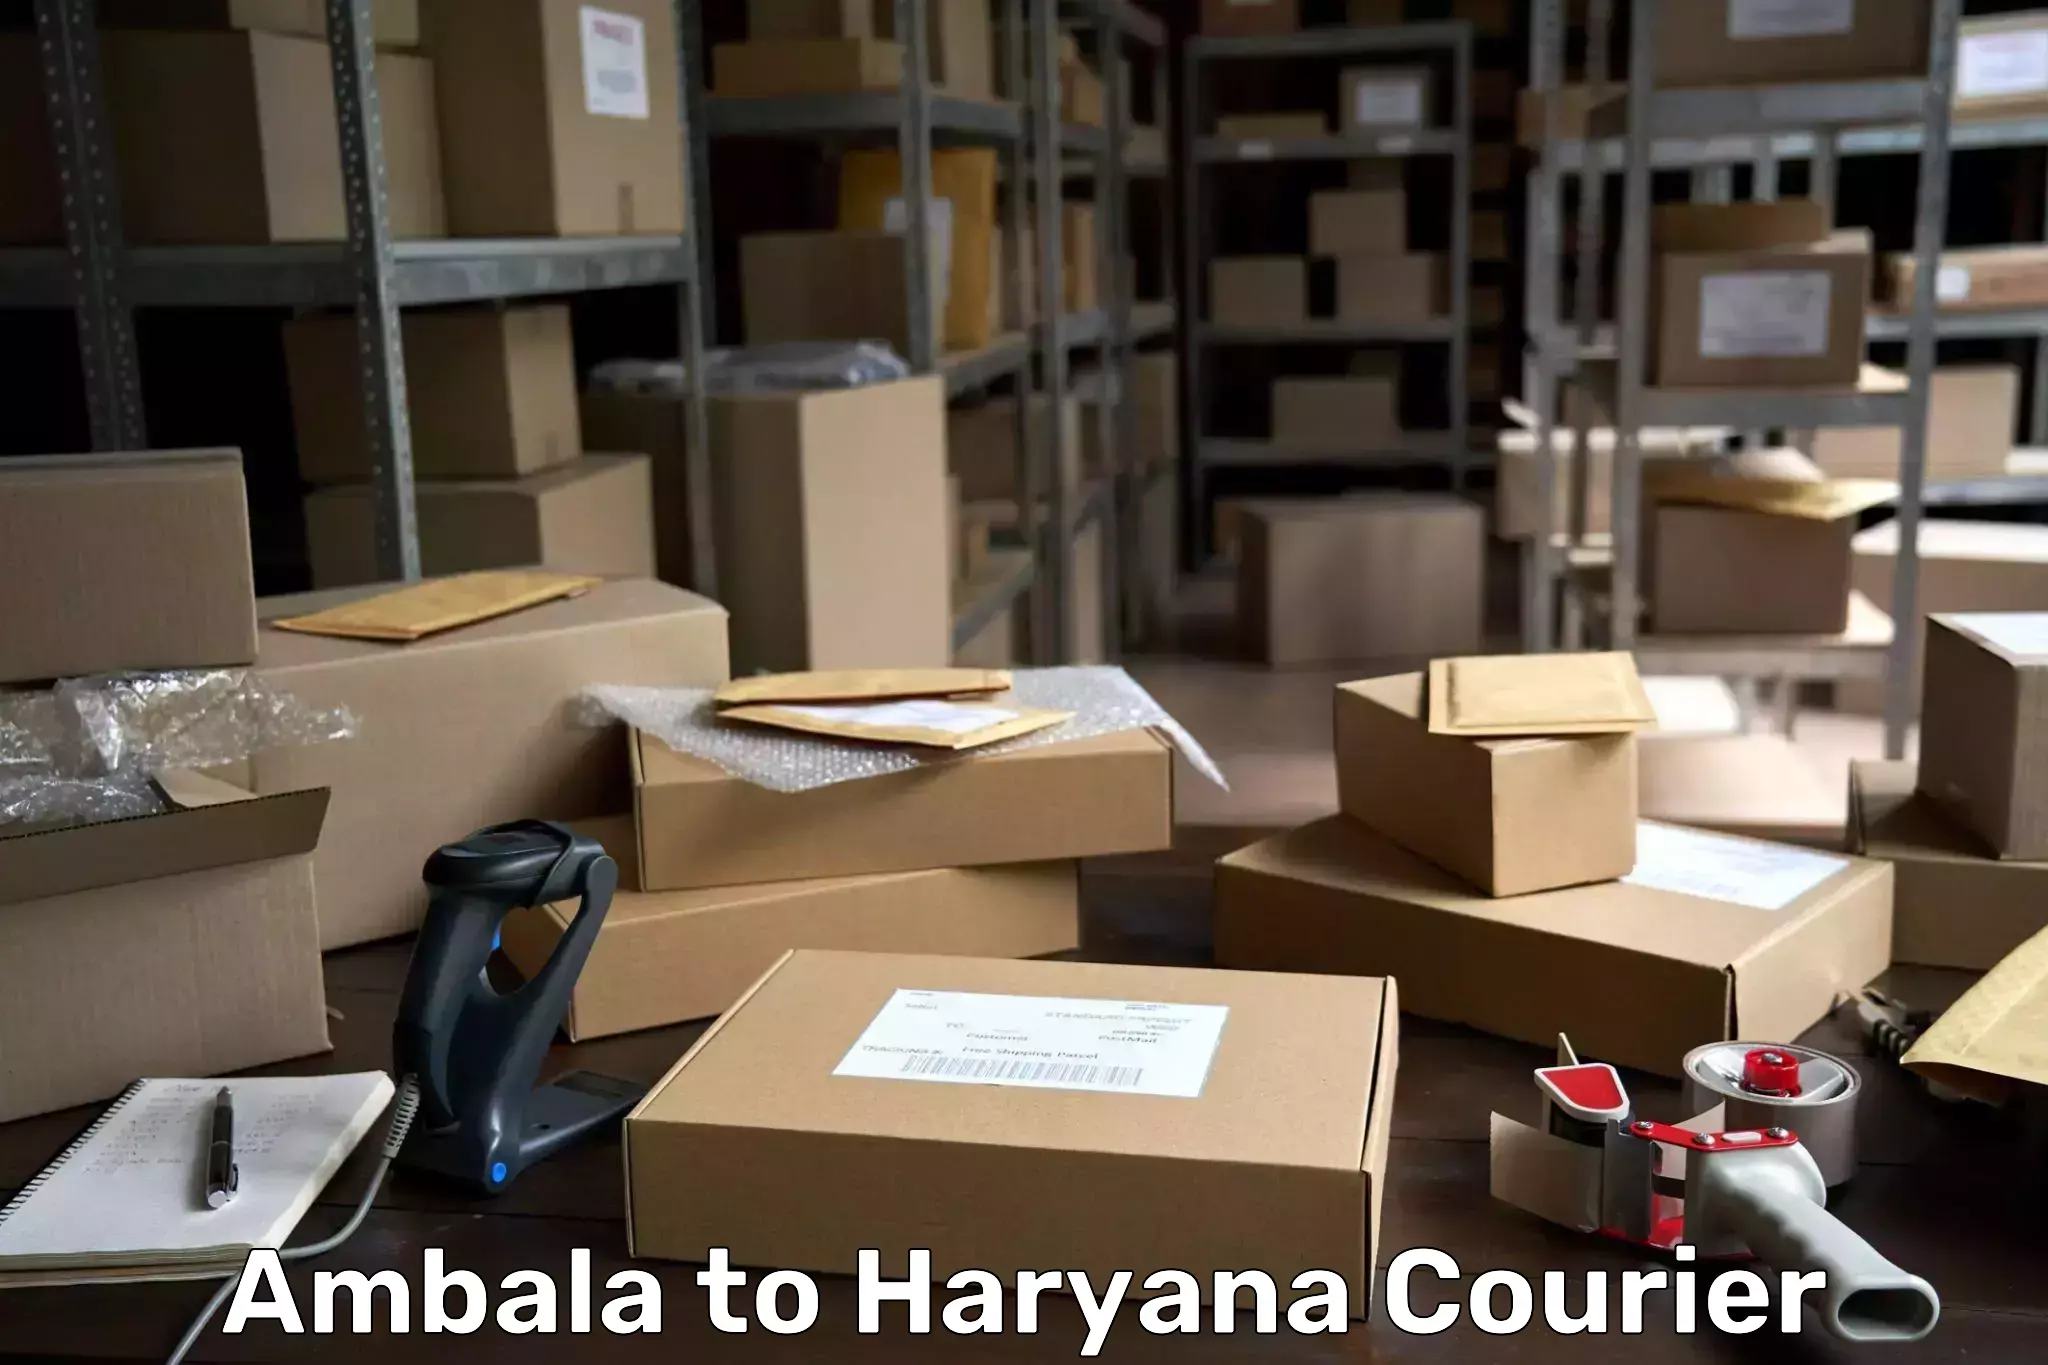 Courier service innovation in Ambala to Sirsa